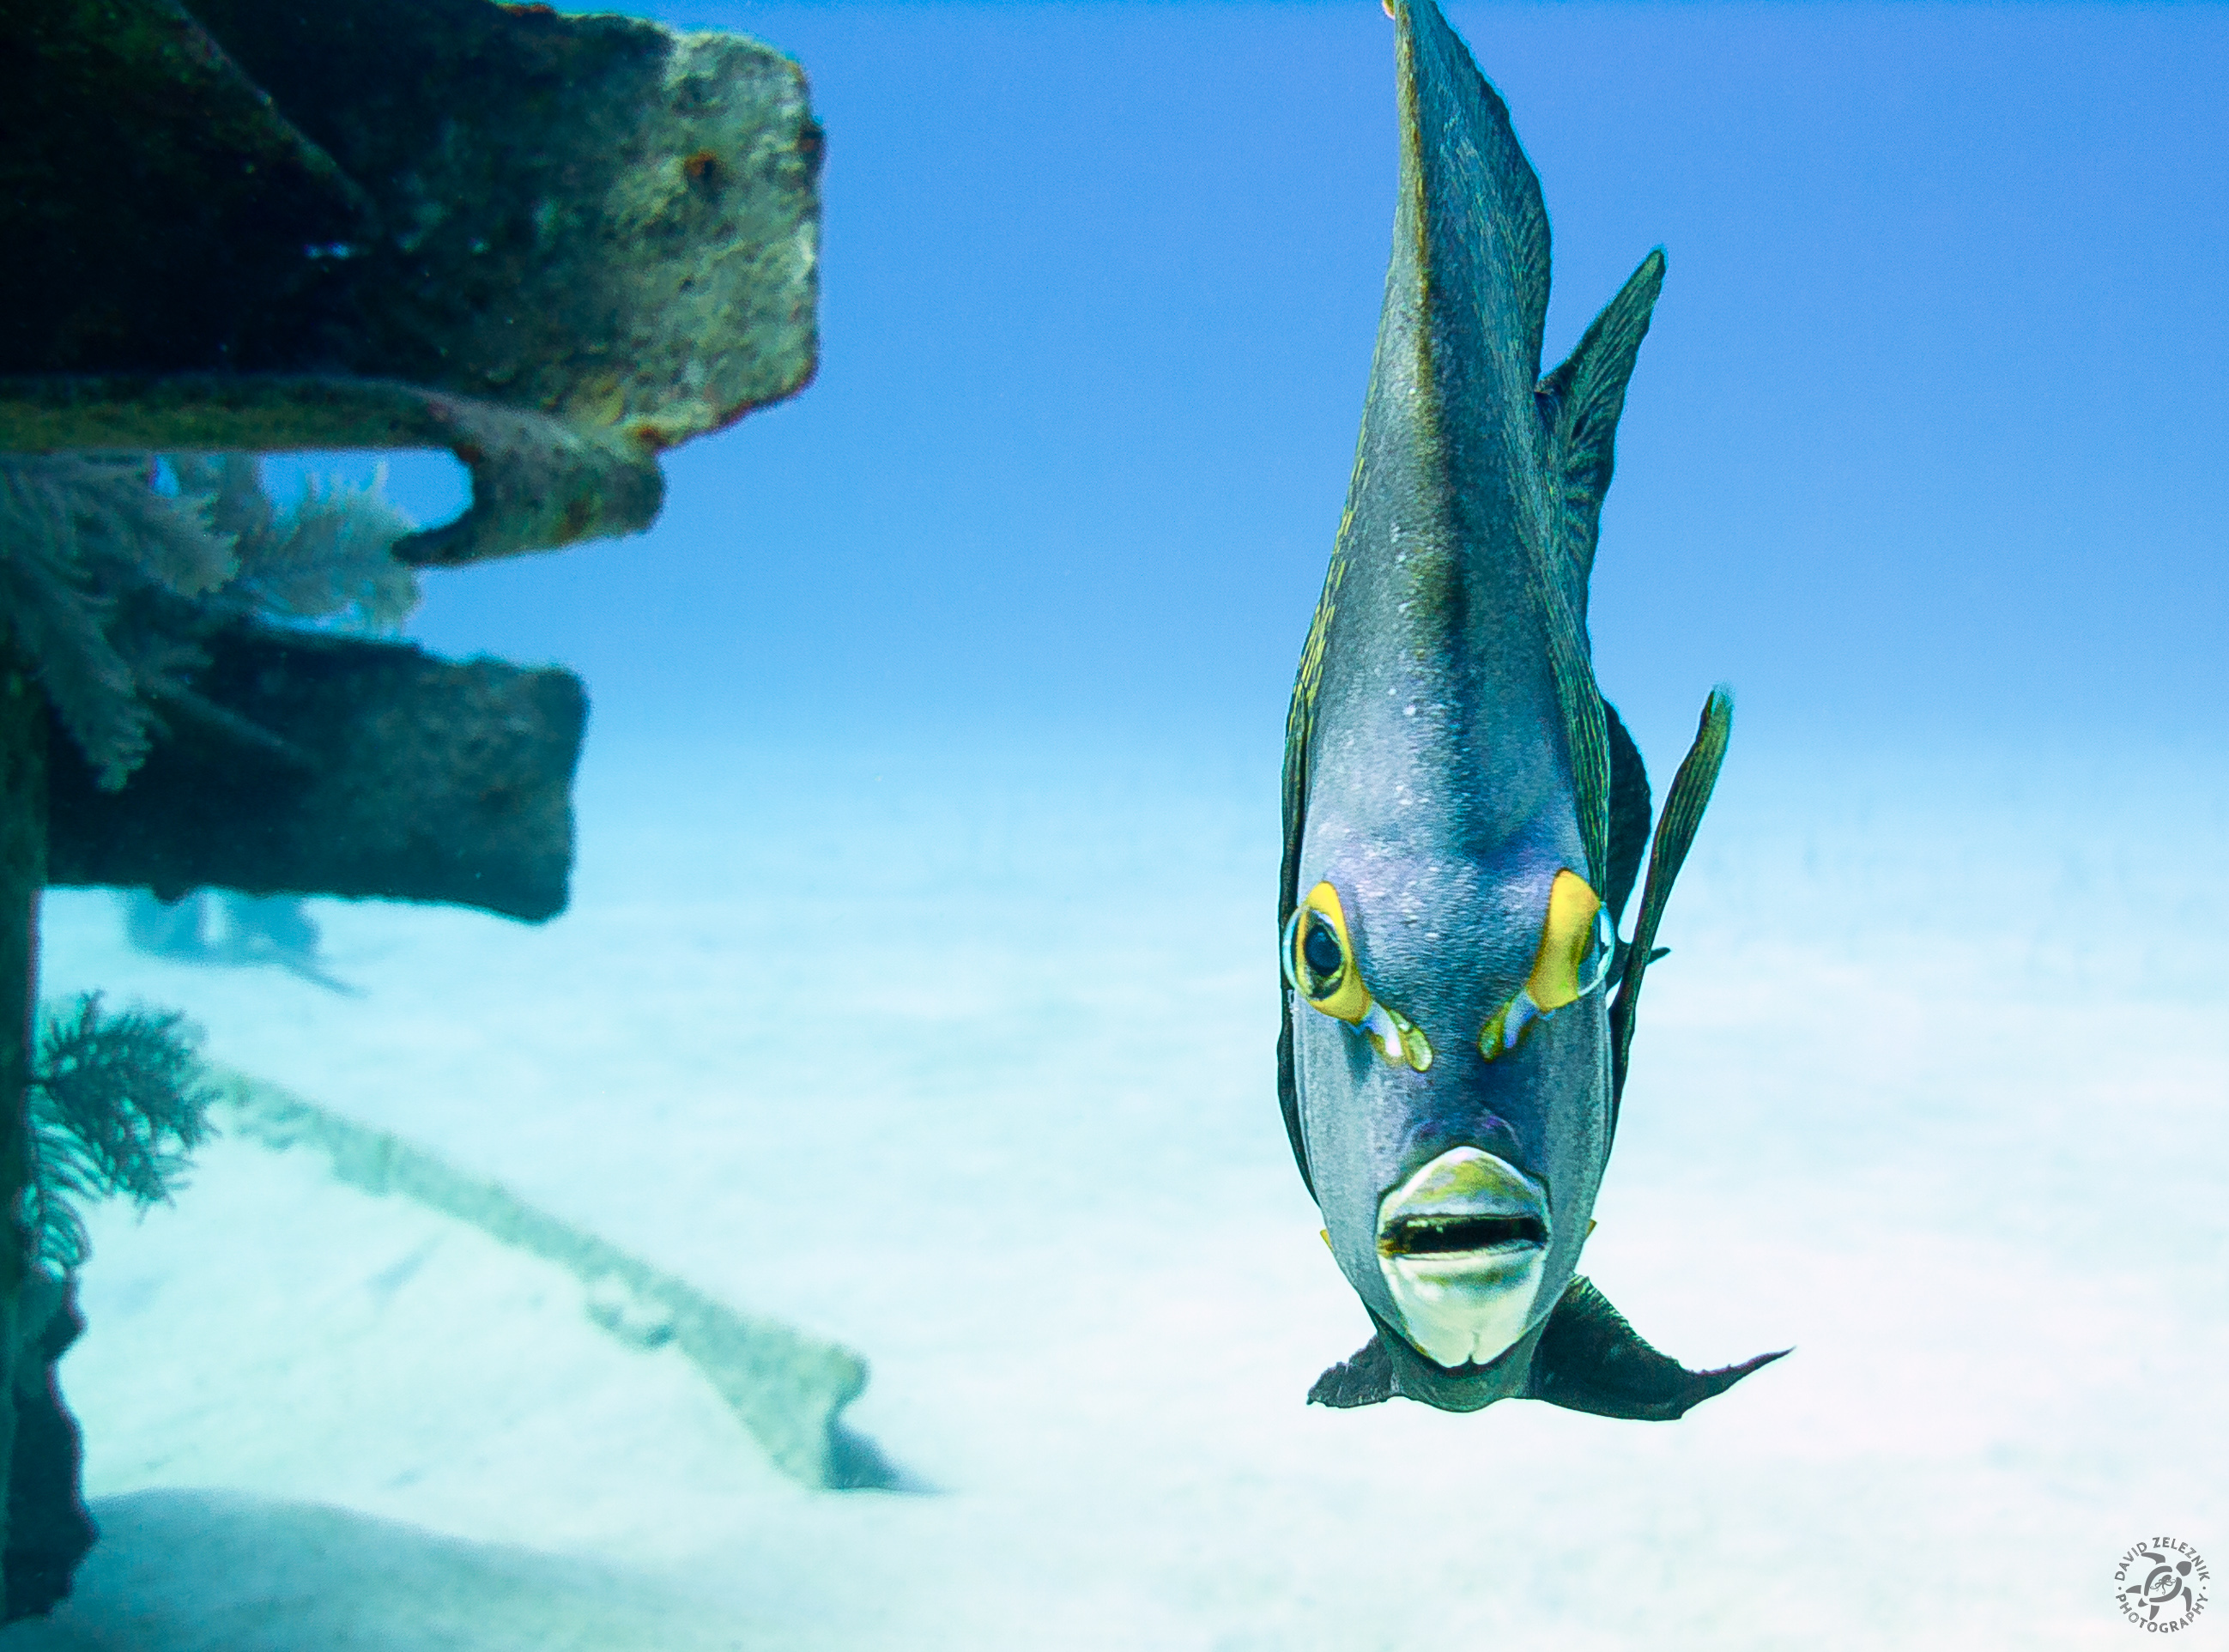 This French Angelfish cruised out from the wreck of the Oro Verde to stare me down